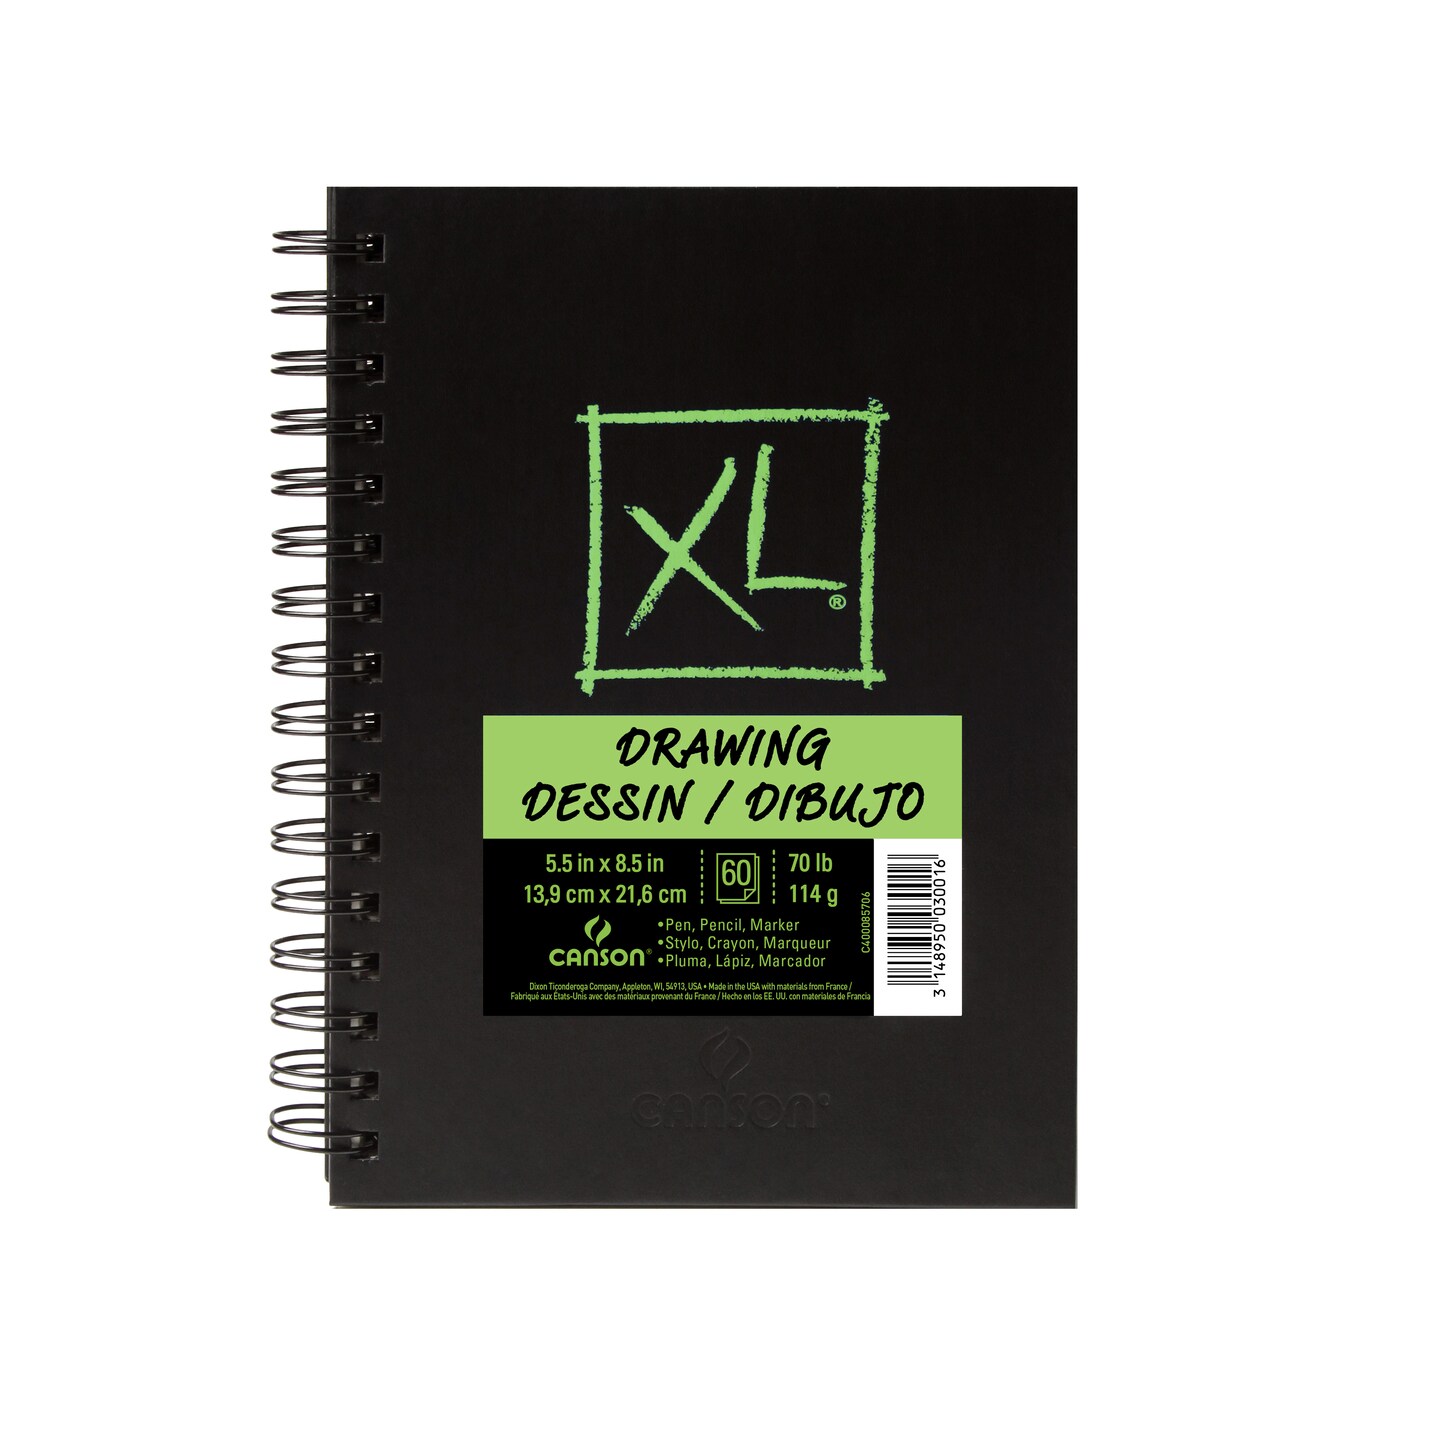 Canson XL Mix-Media 300 GSM Medium Grain A2 Spiral Sketch Pad Price in  India - Buy Canson XL Mix-Media 300 GSM Medium Grain A2 Spiral Sketch Pad  online at Flipkart.com